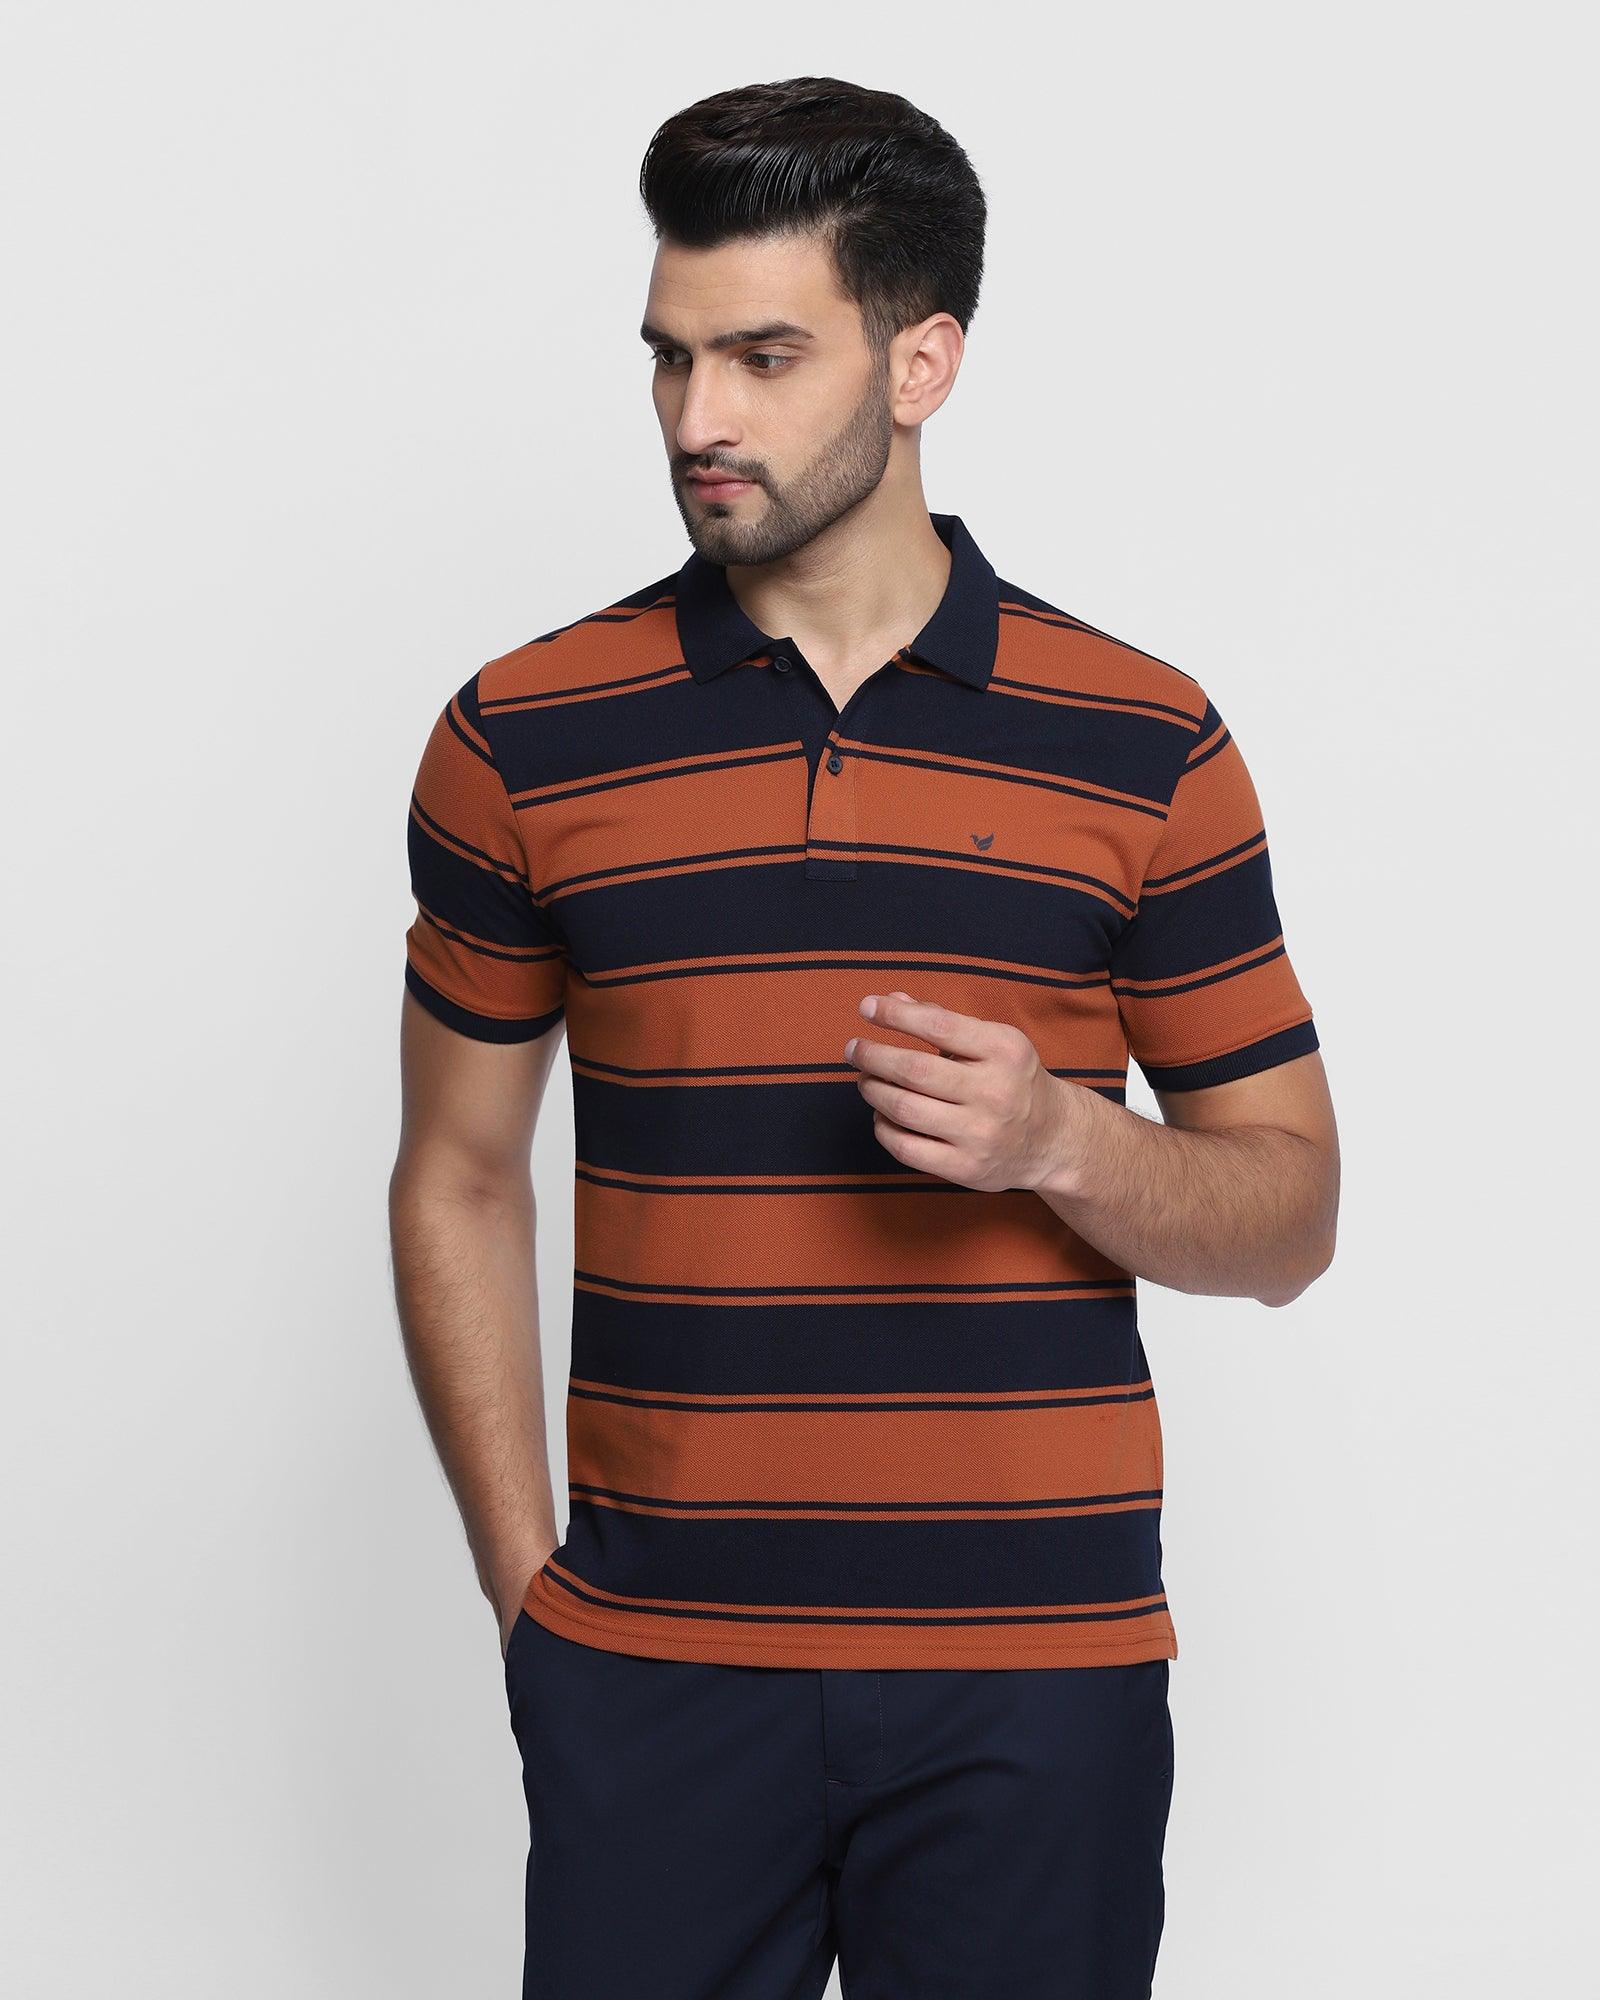 Polo Navy Striped T Shirt - Rugby